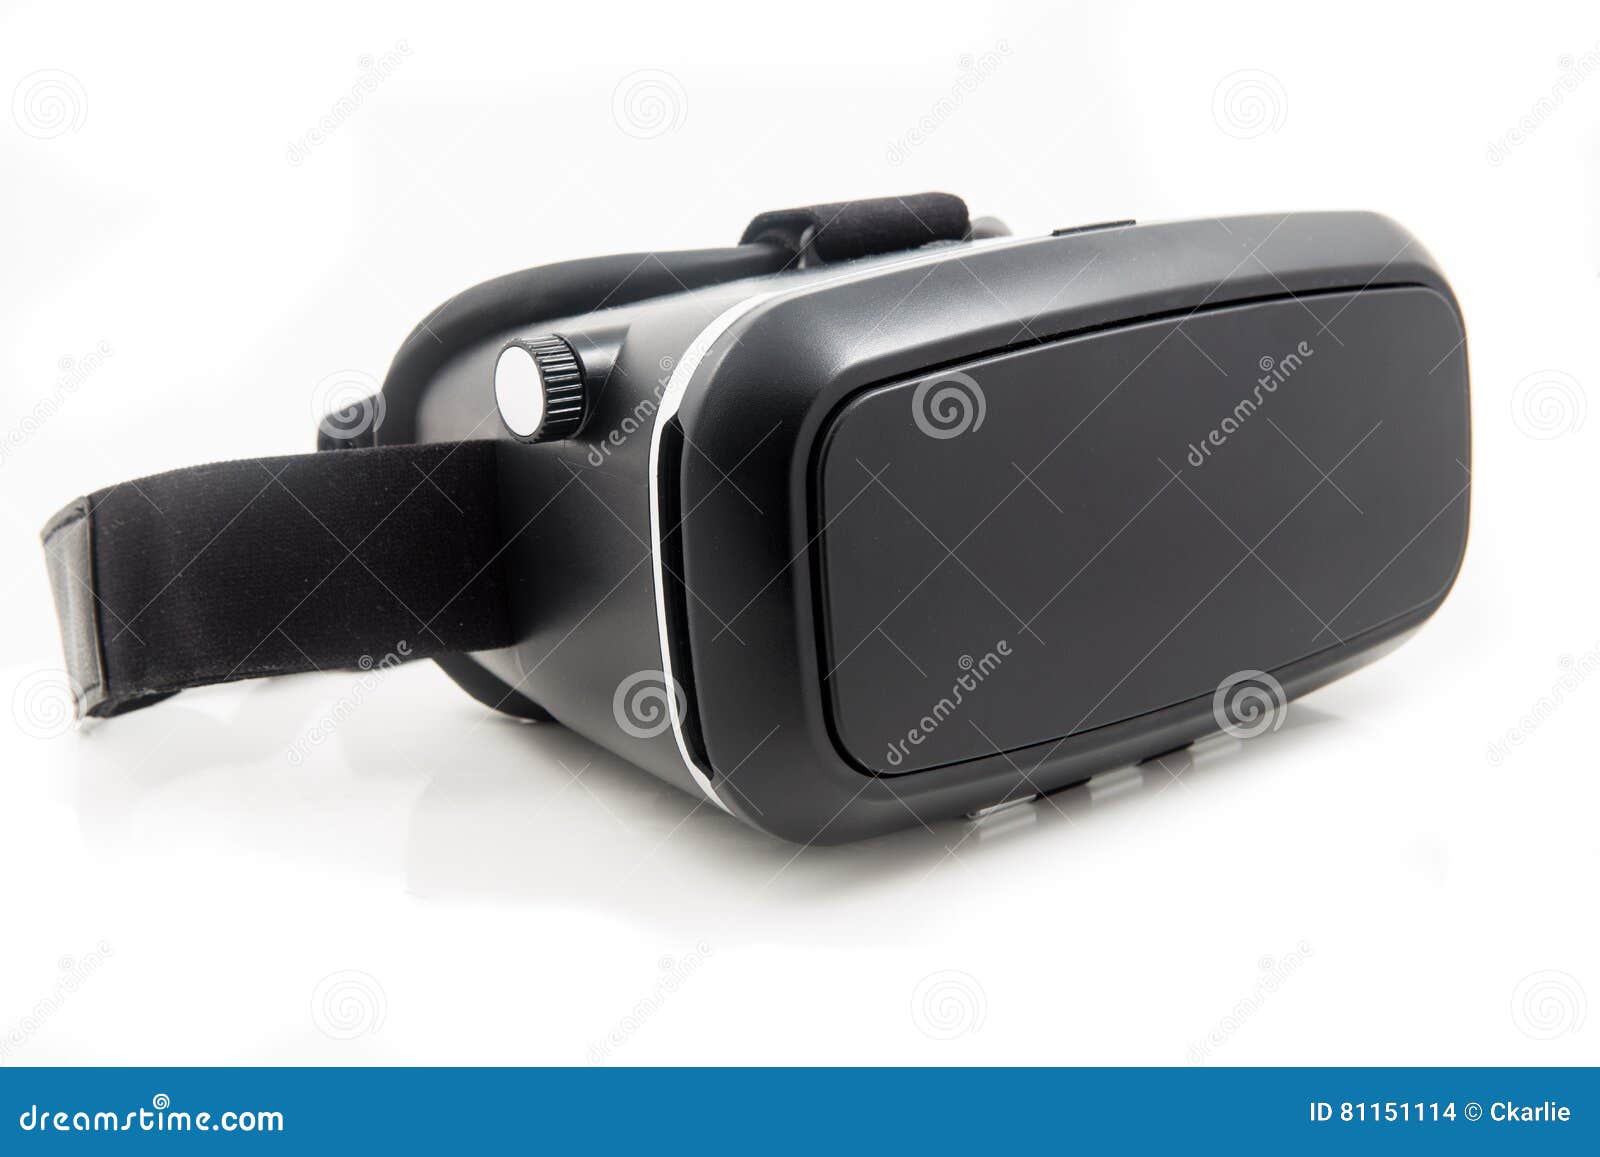 the future vr headset blacks virtual reality transformed half front view  on white background. vr and immersive experience